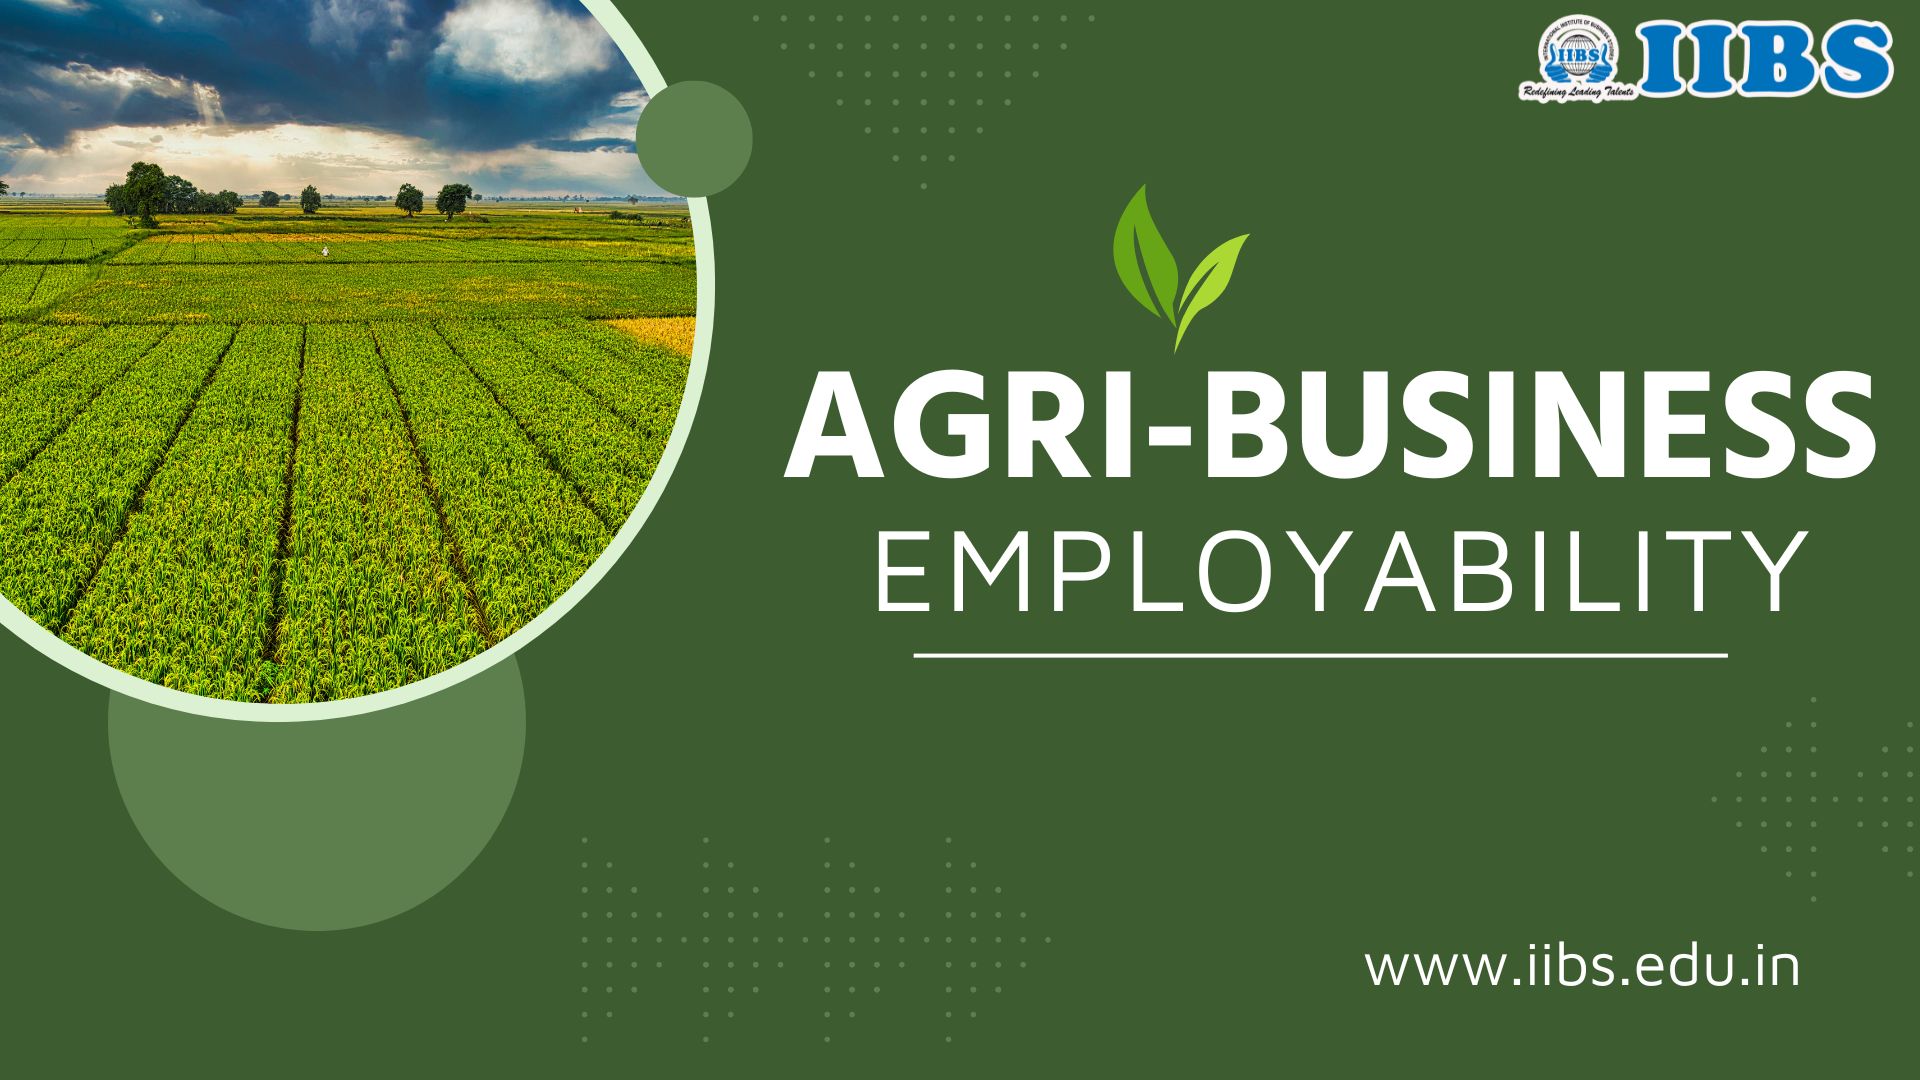 Workshop for ABM students - An Overview of Current Agri-Business Employability | MBA in Digital Marketing in Bangalore